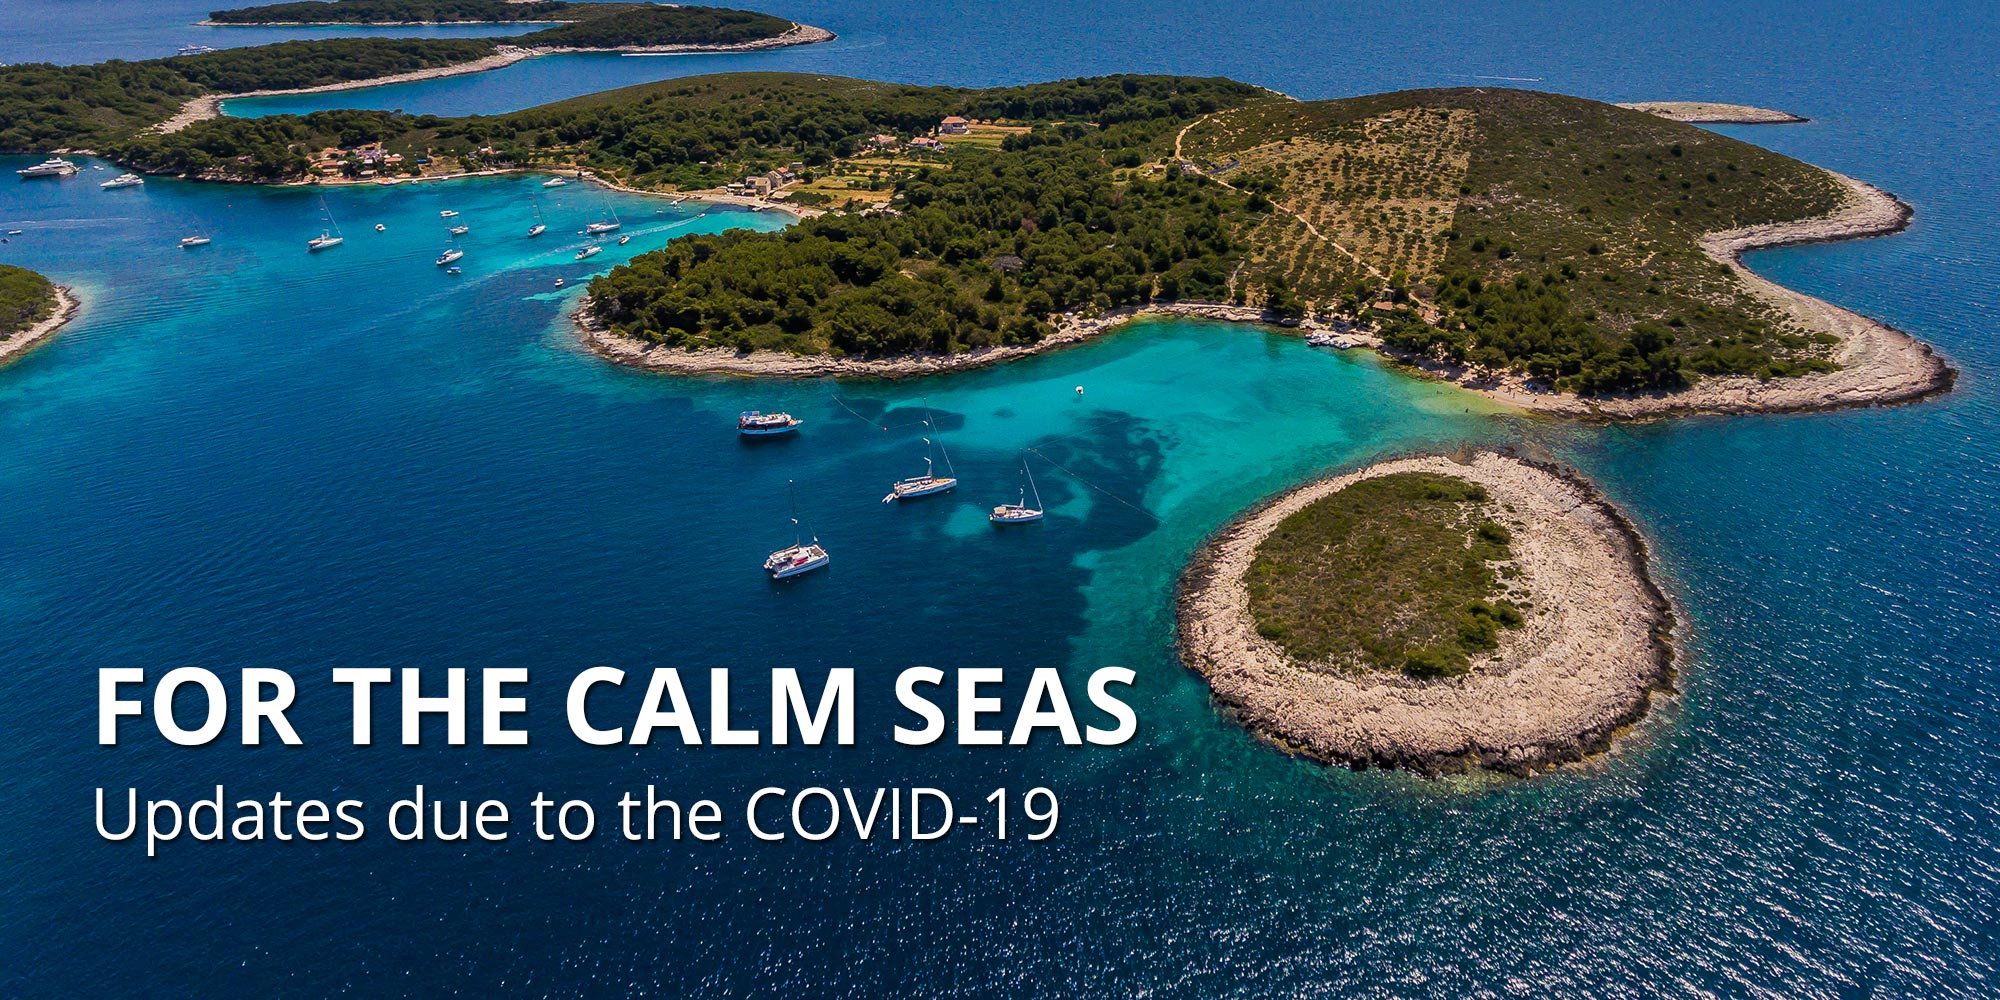 For the calm seas - Updates due to the COVID-19